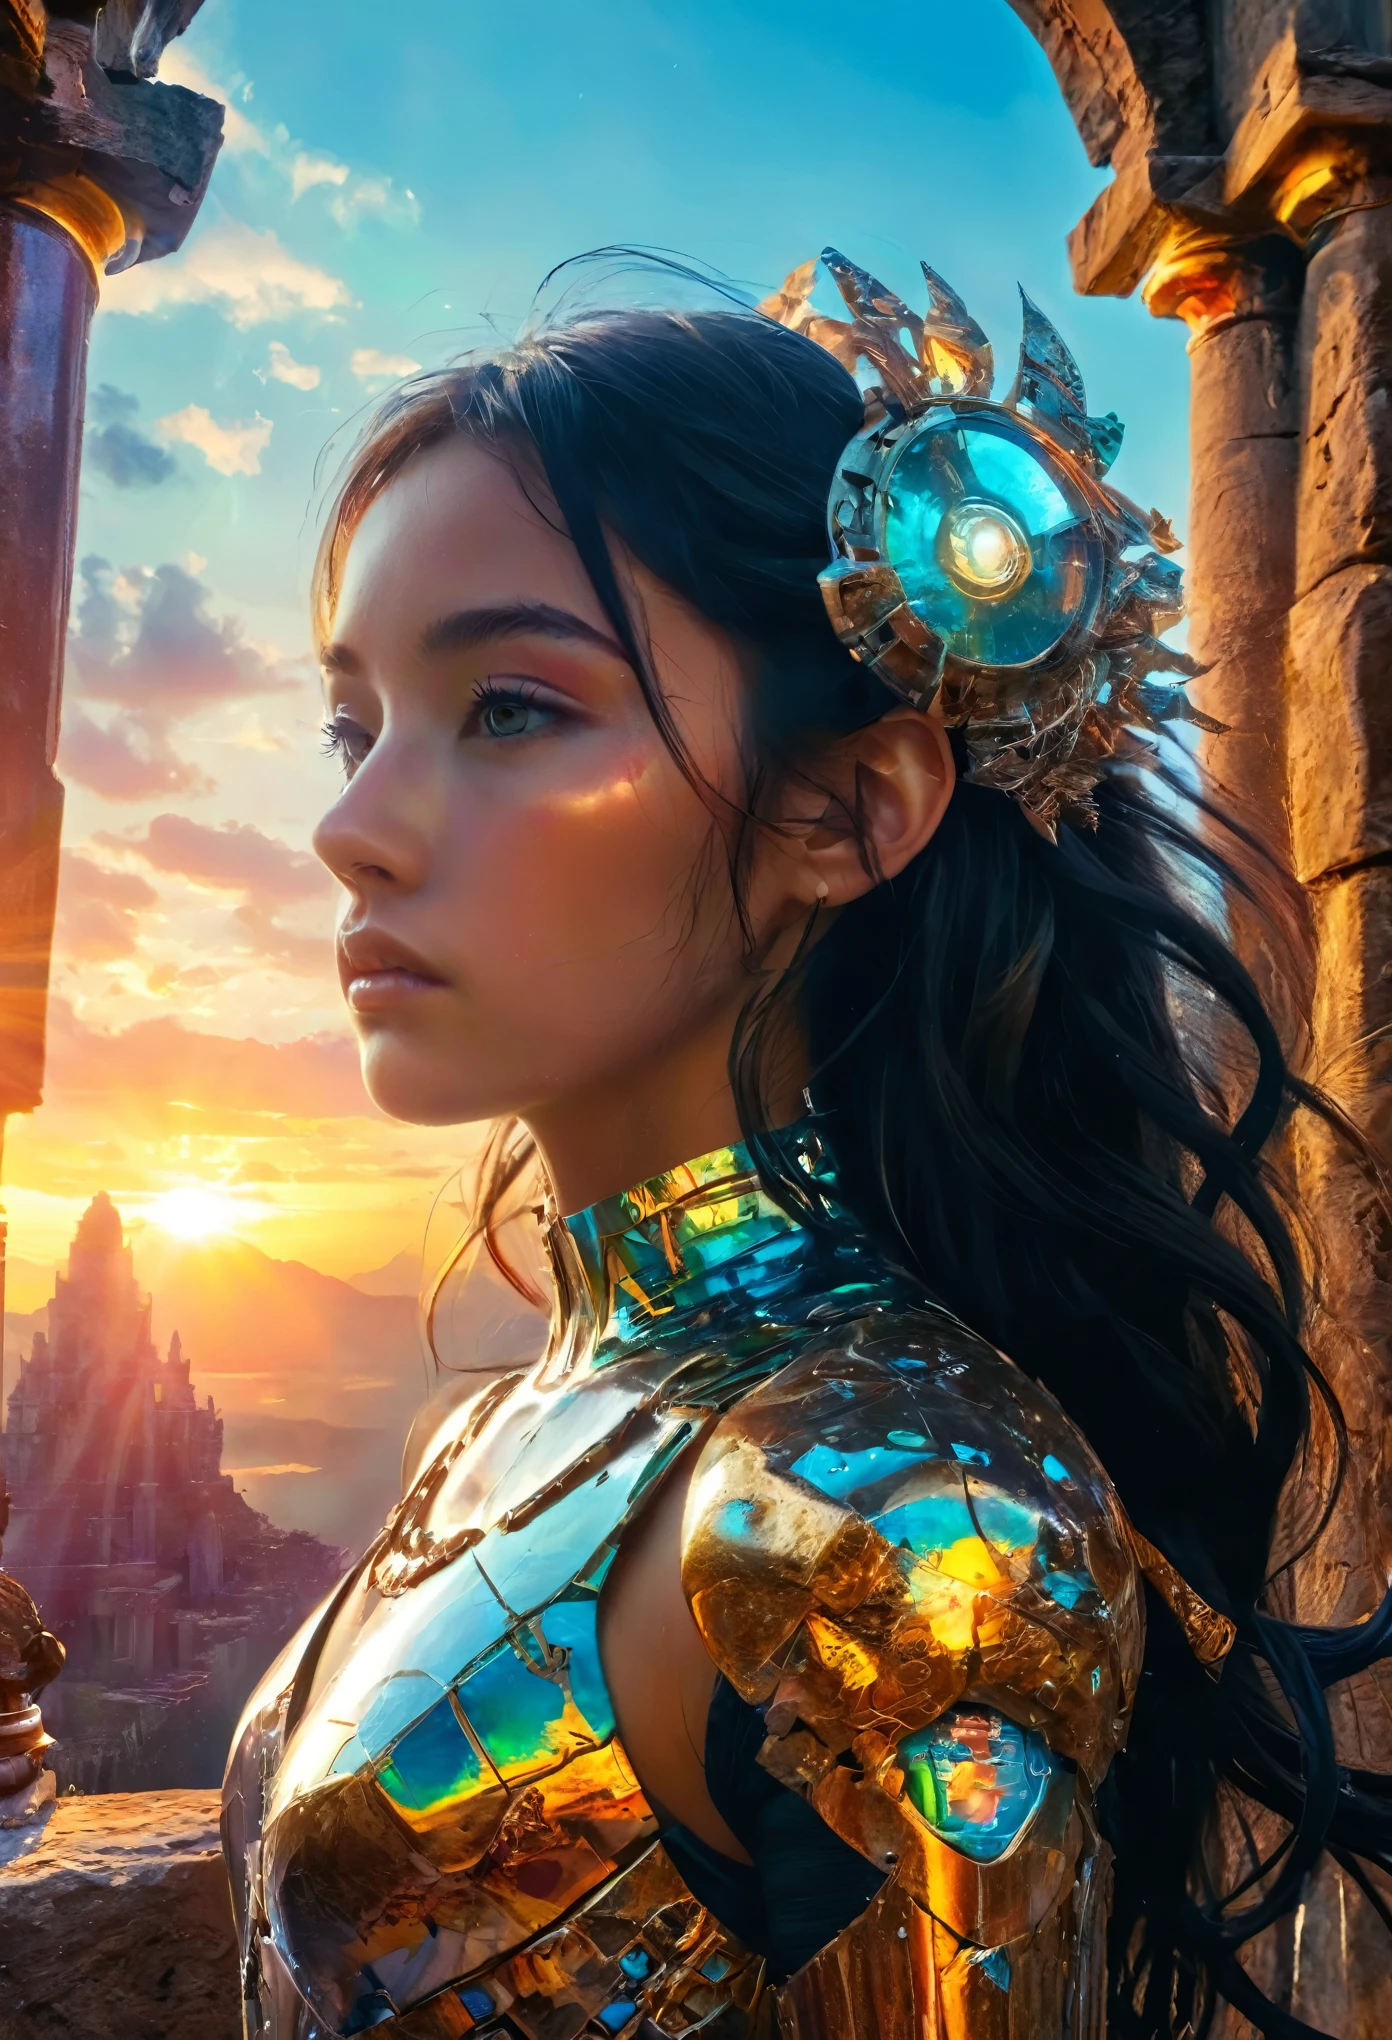 (best quality,4k,8k,highres,masterpiece:1.2),ultra-detailed,realistic:1.37,a beautiful Italian cyborg girl standing in the ruins of the Inca Empire, Insertion, metallic body, glowing cybernetics, graceful facial features, mysterious eyes, cybernetic enhancements, ethereal appearance, the ancient stone structures, stones and vines, delicate lotus blossoms, steampunk-inspired elements, ancient technology fused with futuristic enhancements, vibrant colors contrasting with the weathered ruins, fierce determination in her eyes, holding a holographic map to unlock the secrets of the lost civilization, artistic portrait with surreal elements, soft lighting creating a dreamlike atmosphere, colorful sunrise painting the sky with shades of orange and pink, scattered ancient artifacts hinting at a forgotten past, Naomi Scott, ocean view, 